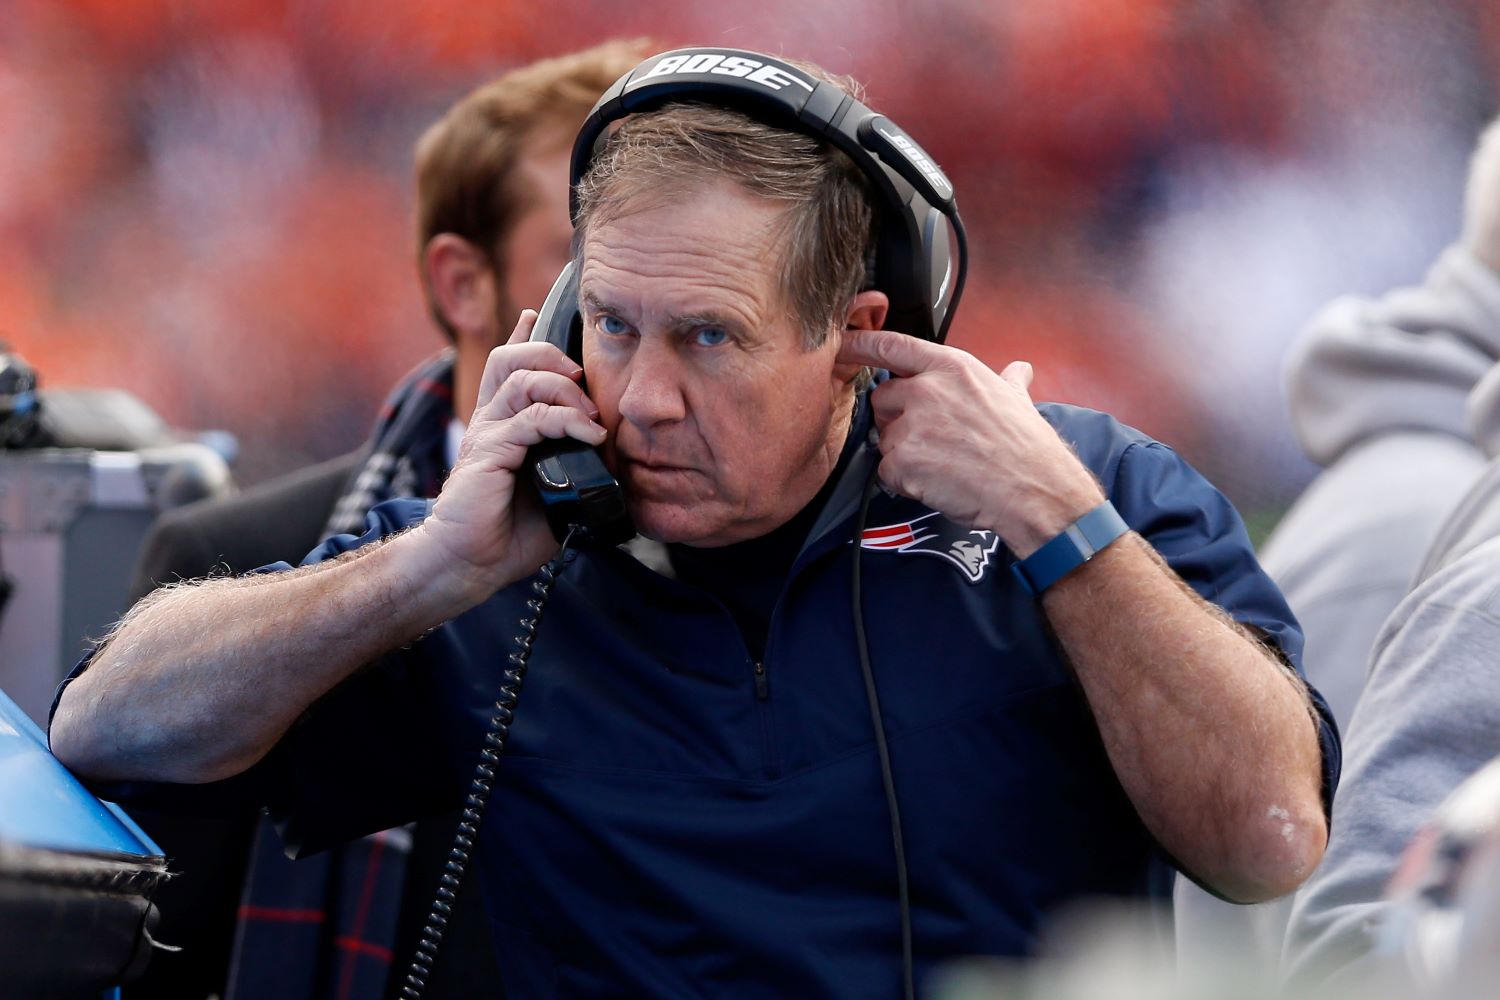 Bill Belichick just convinced a valuable member of the Patriots to abandon his career plans. Will that lead to a fast rebuild in New England?